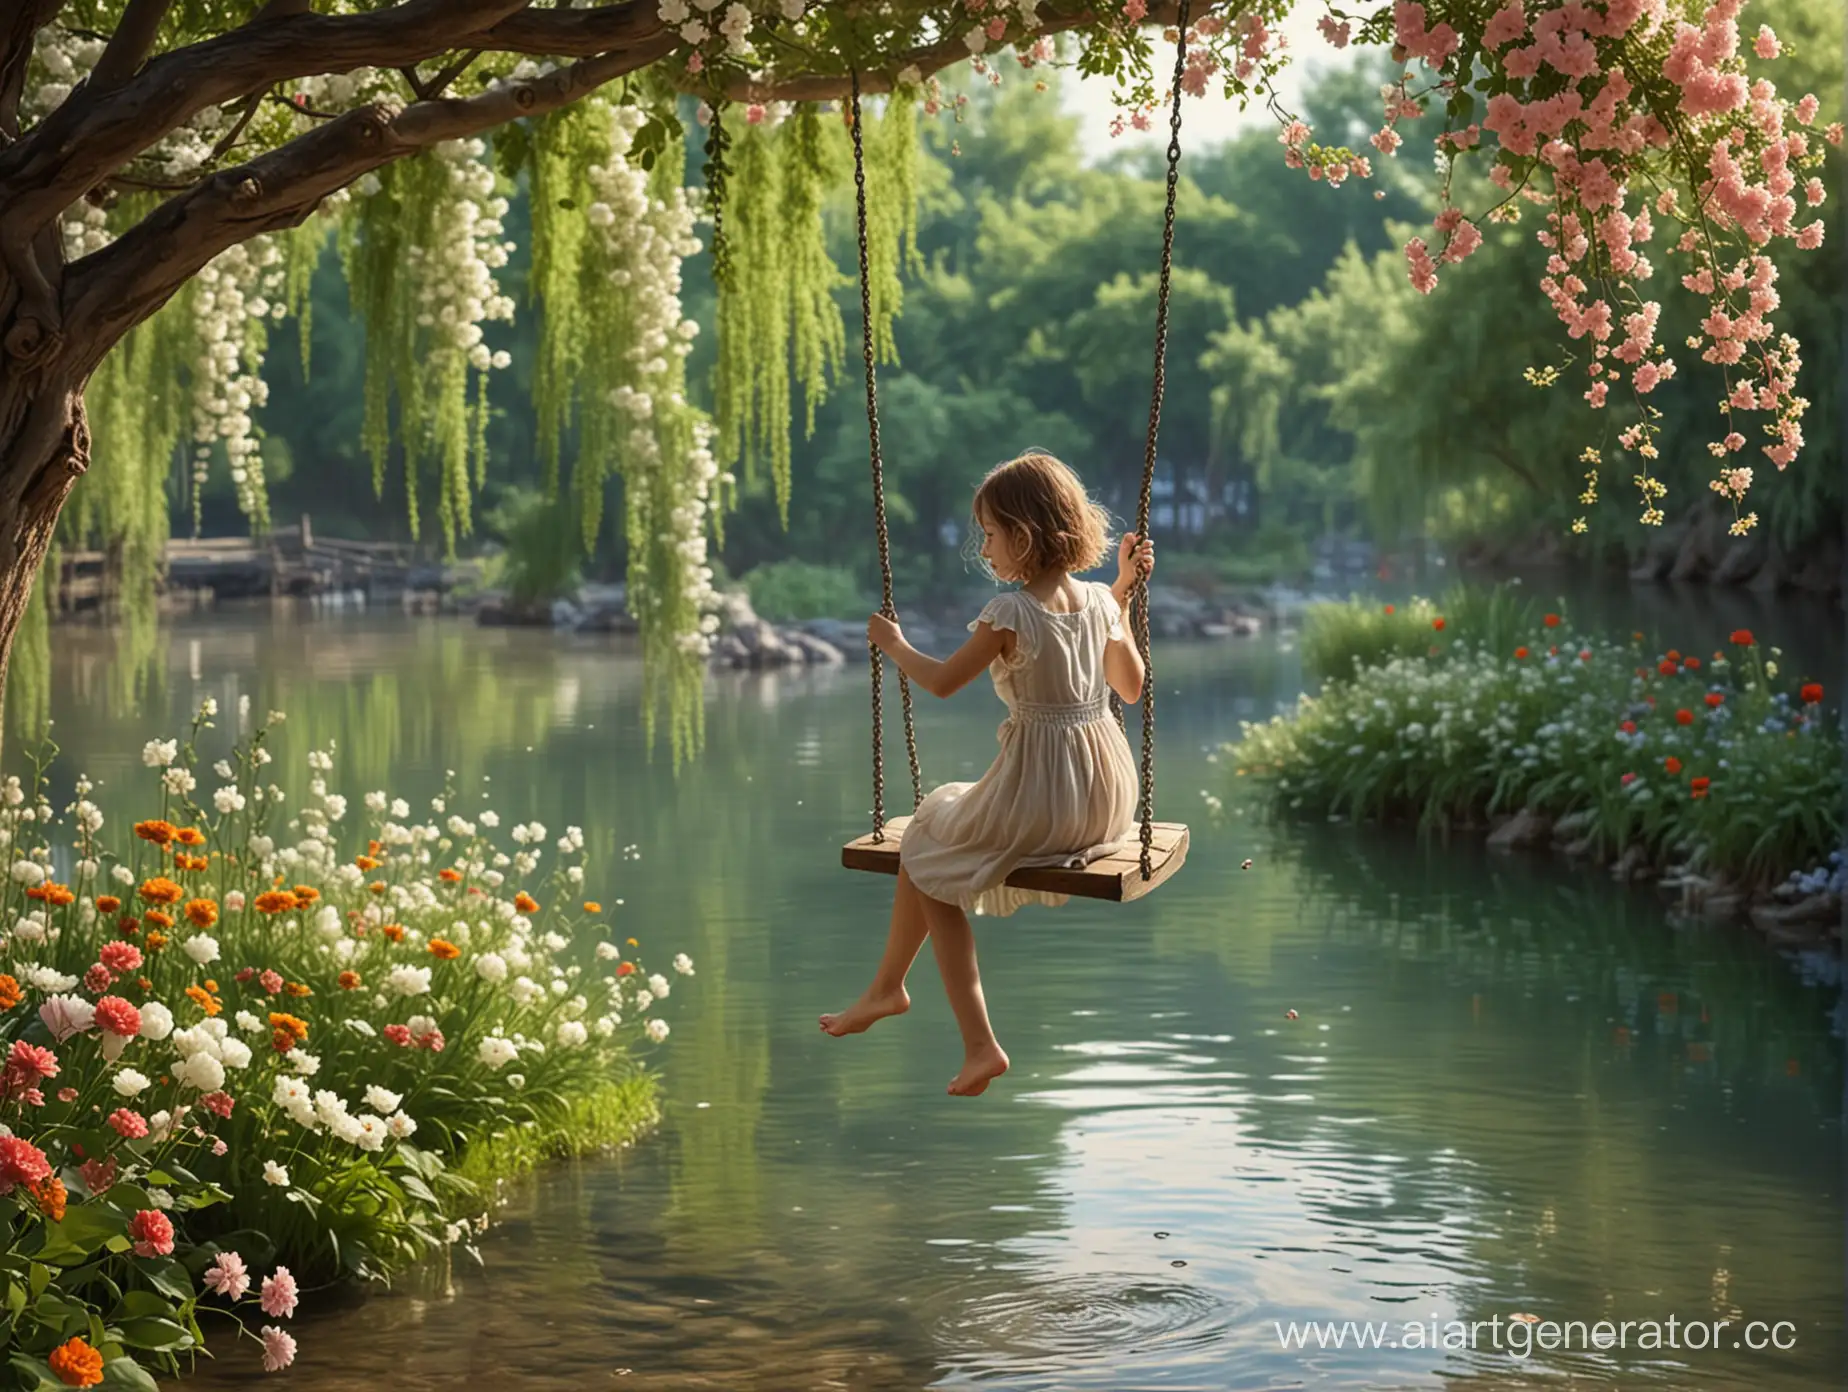 Girl-Swinging-Above-River-Surrounded-by-Blooming-Flowers-in-a-Realistic-Blurry-Landscape